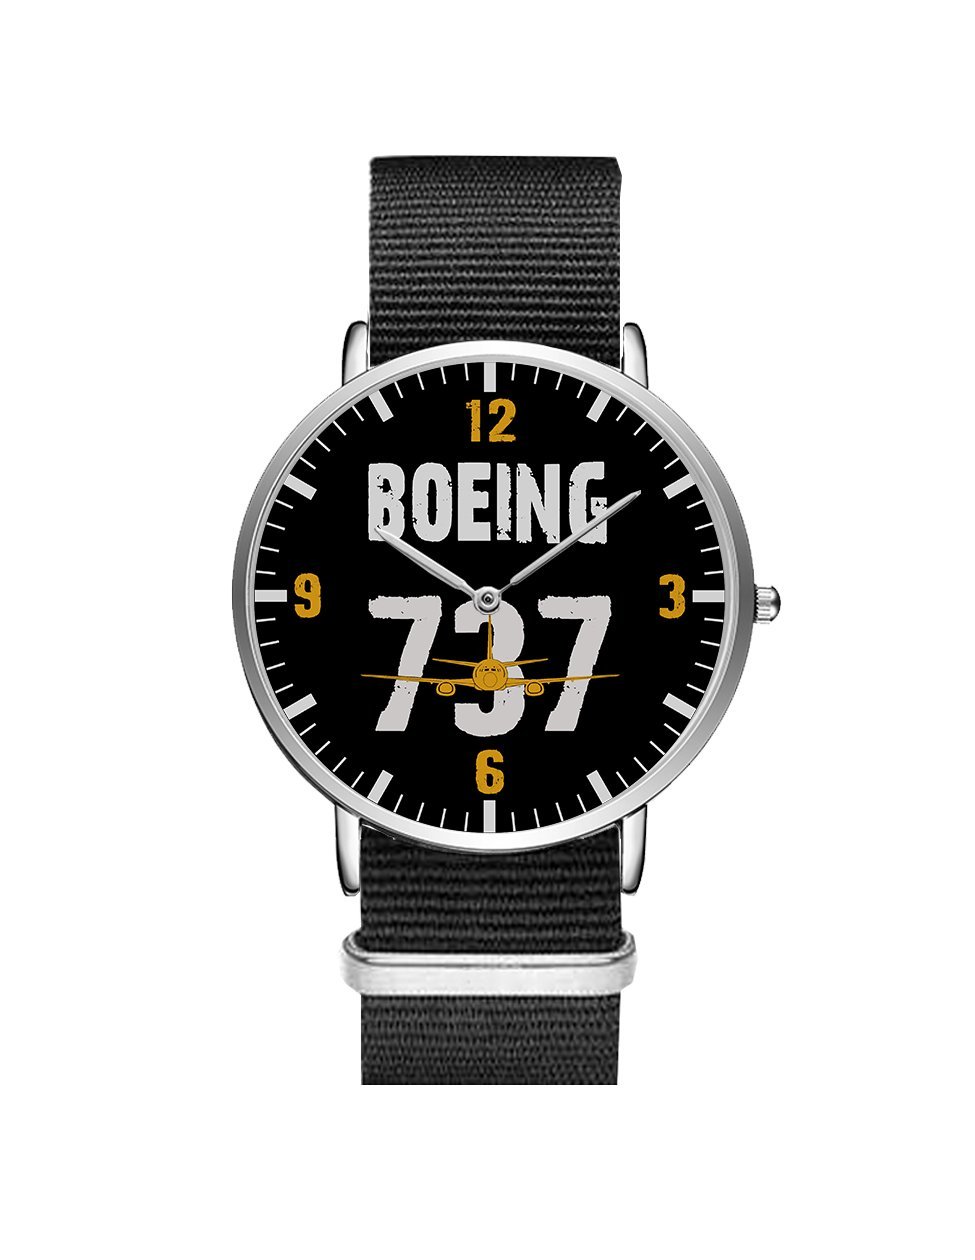 Boeing 737 Designed Leather Strap Watches Pilot Eyes Store Silver & Black Nylon Strap 